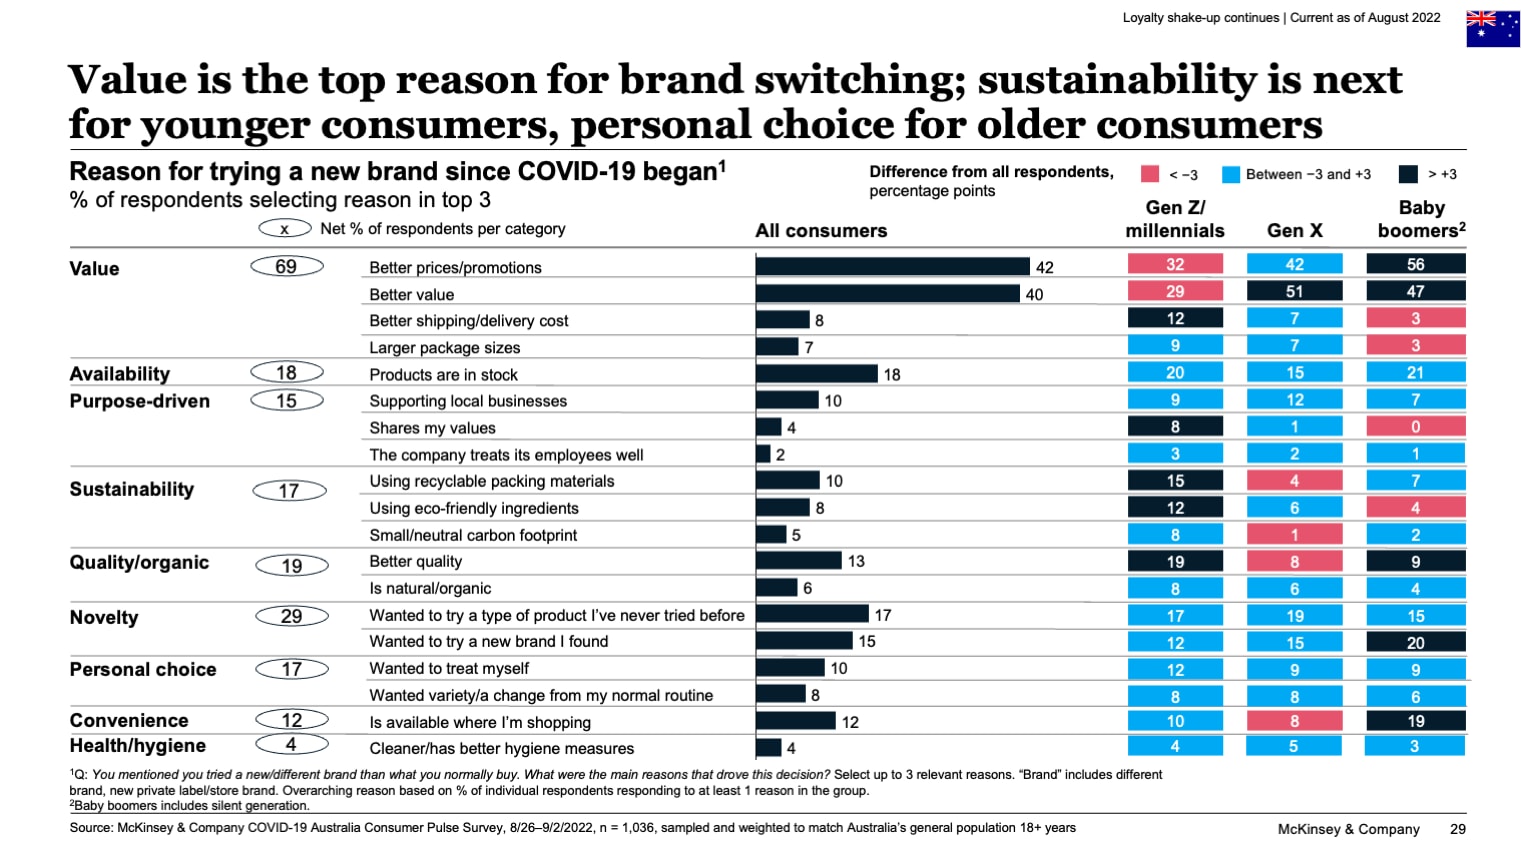 Value is the top reason for brand switching; sustainability is next for younger consumers, personal choice for older consumers